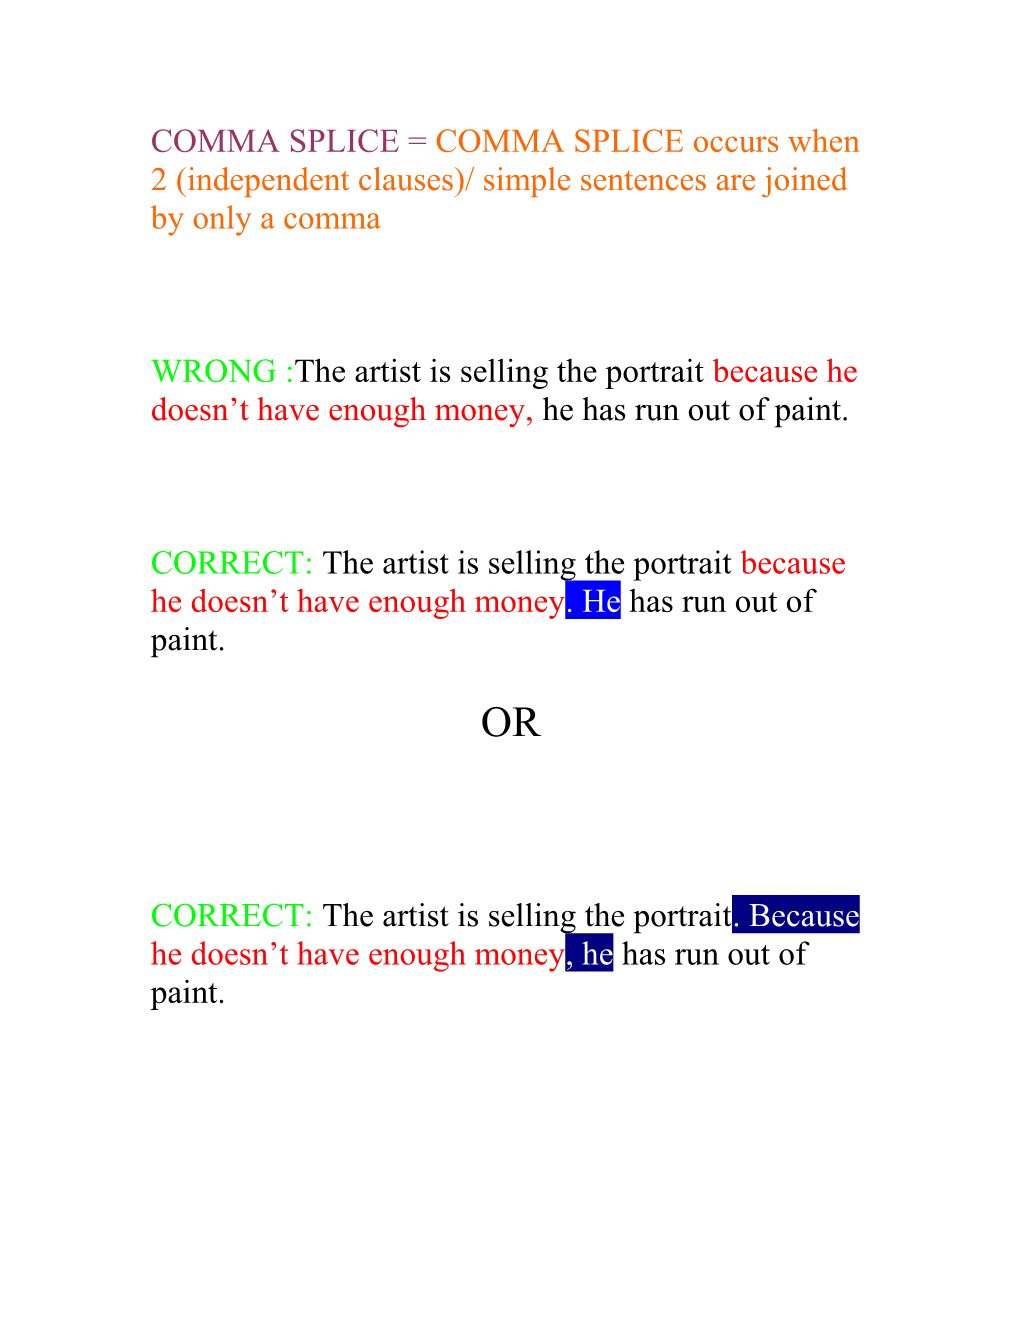 COMMA SPLICE = COMMA SPLICE Occurs When 2 (Independent Clauses)/ Simple Sentences Are Joined